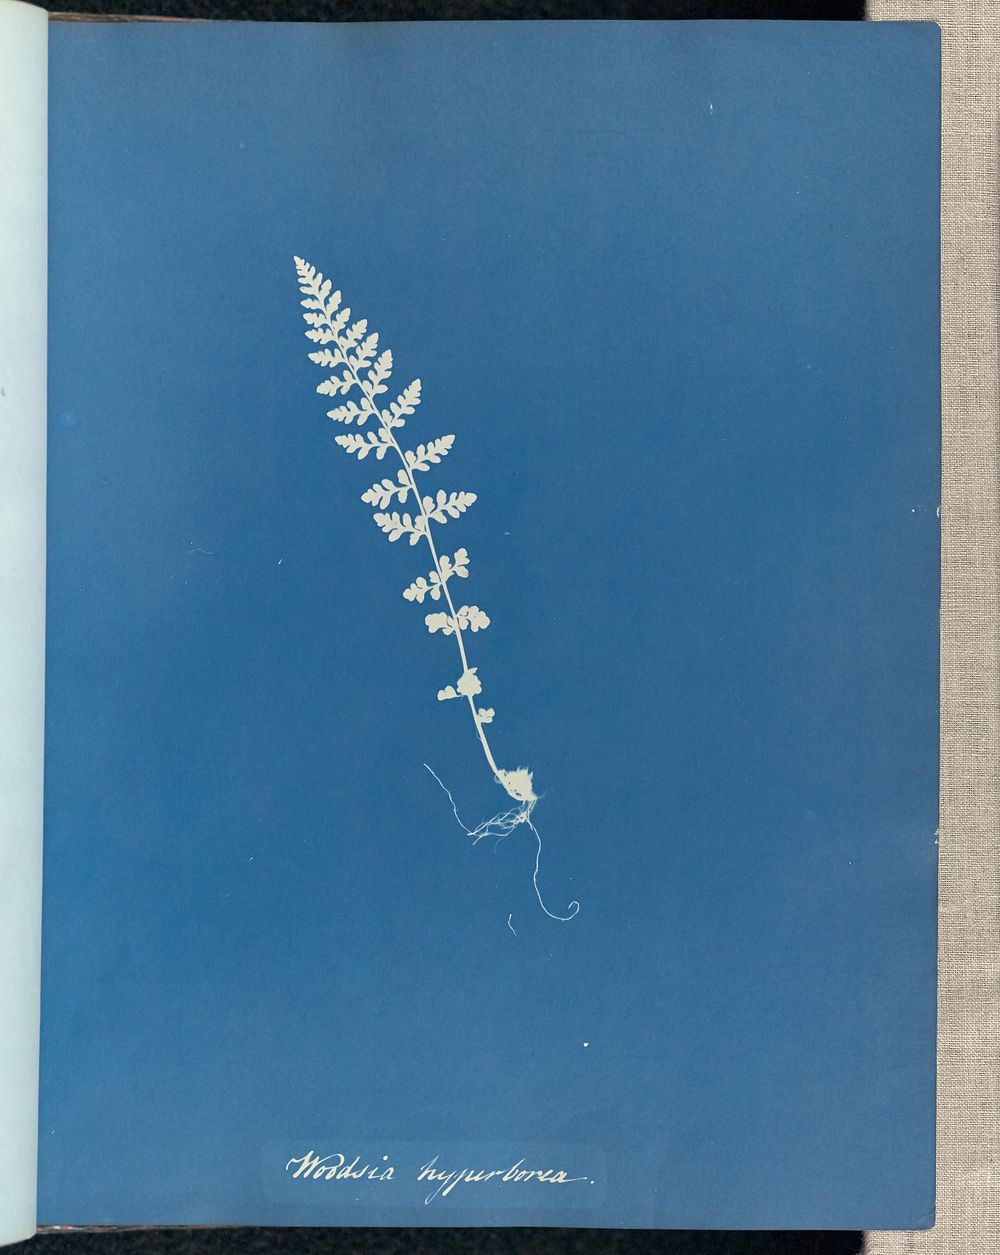 Woodsia hyperborea by Anna Atkins and Anne Dixon